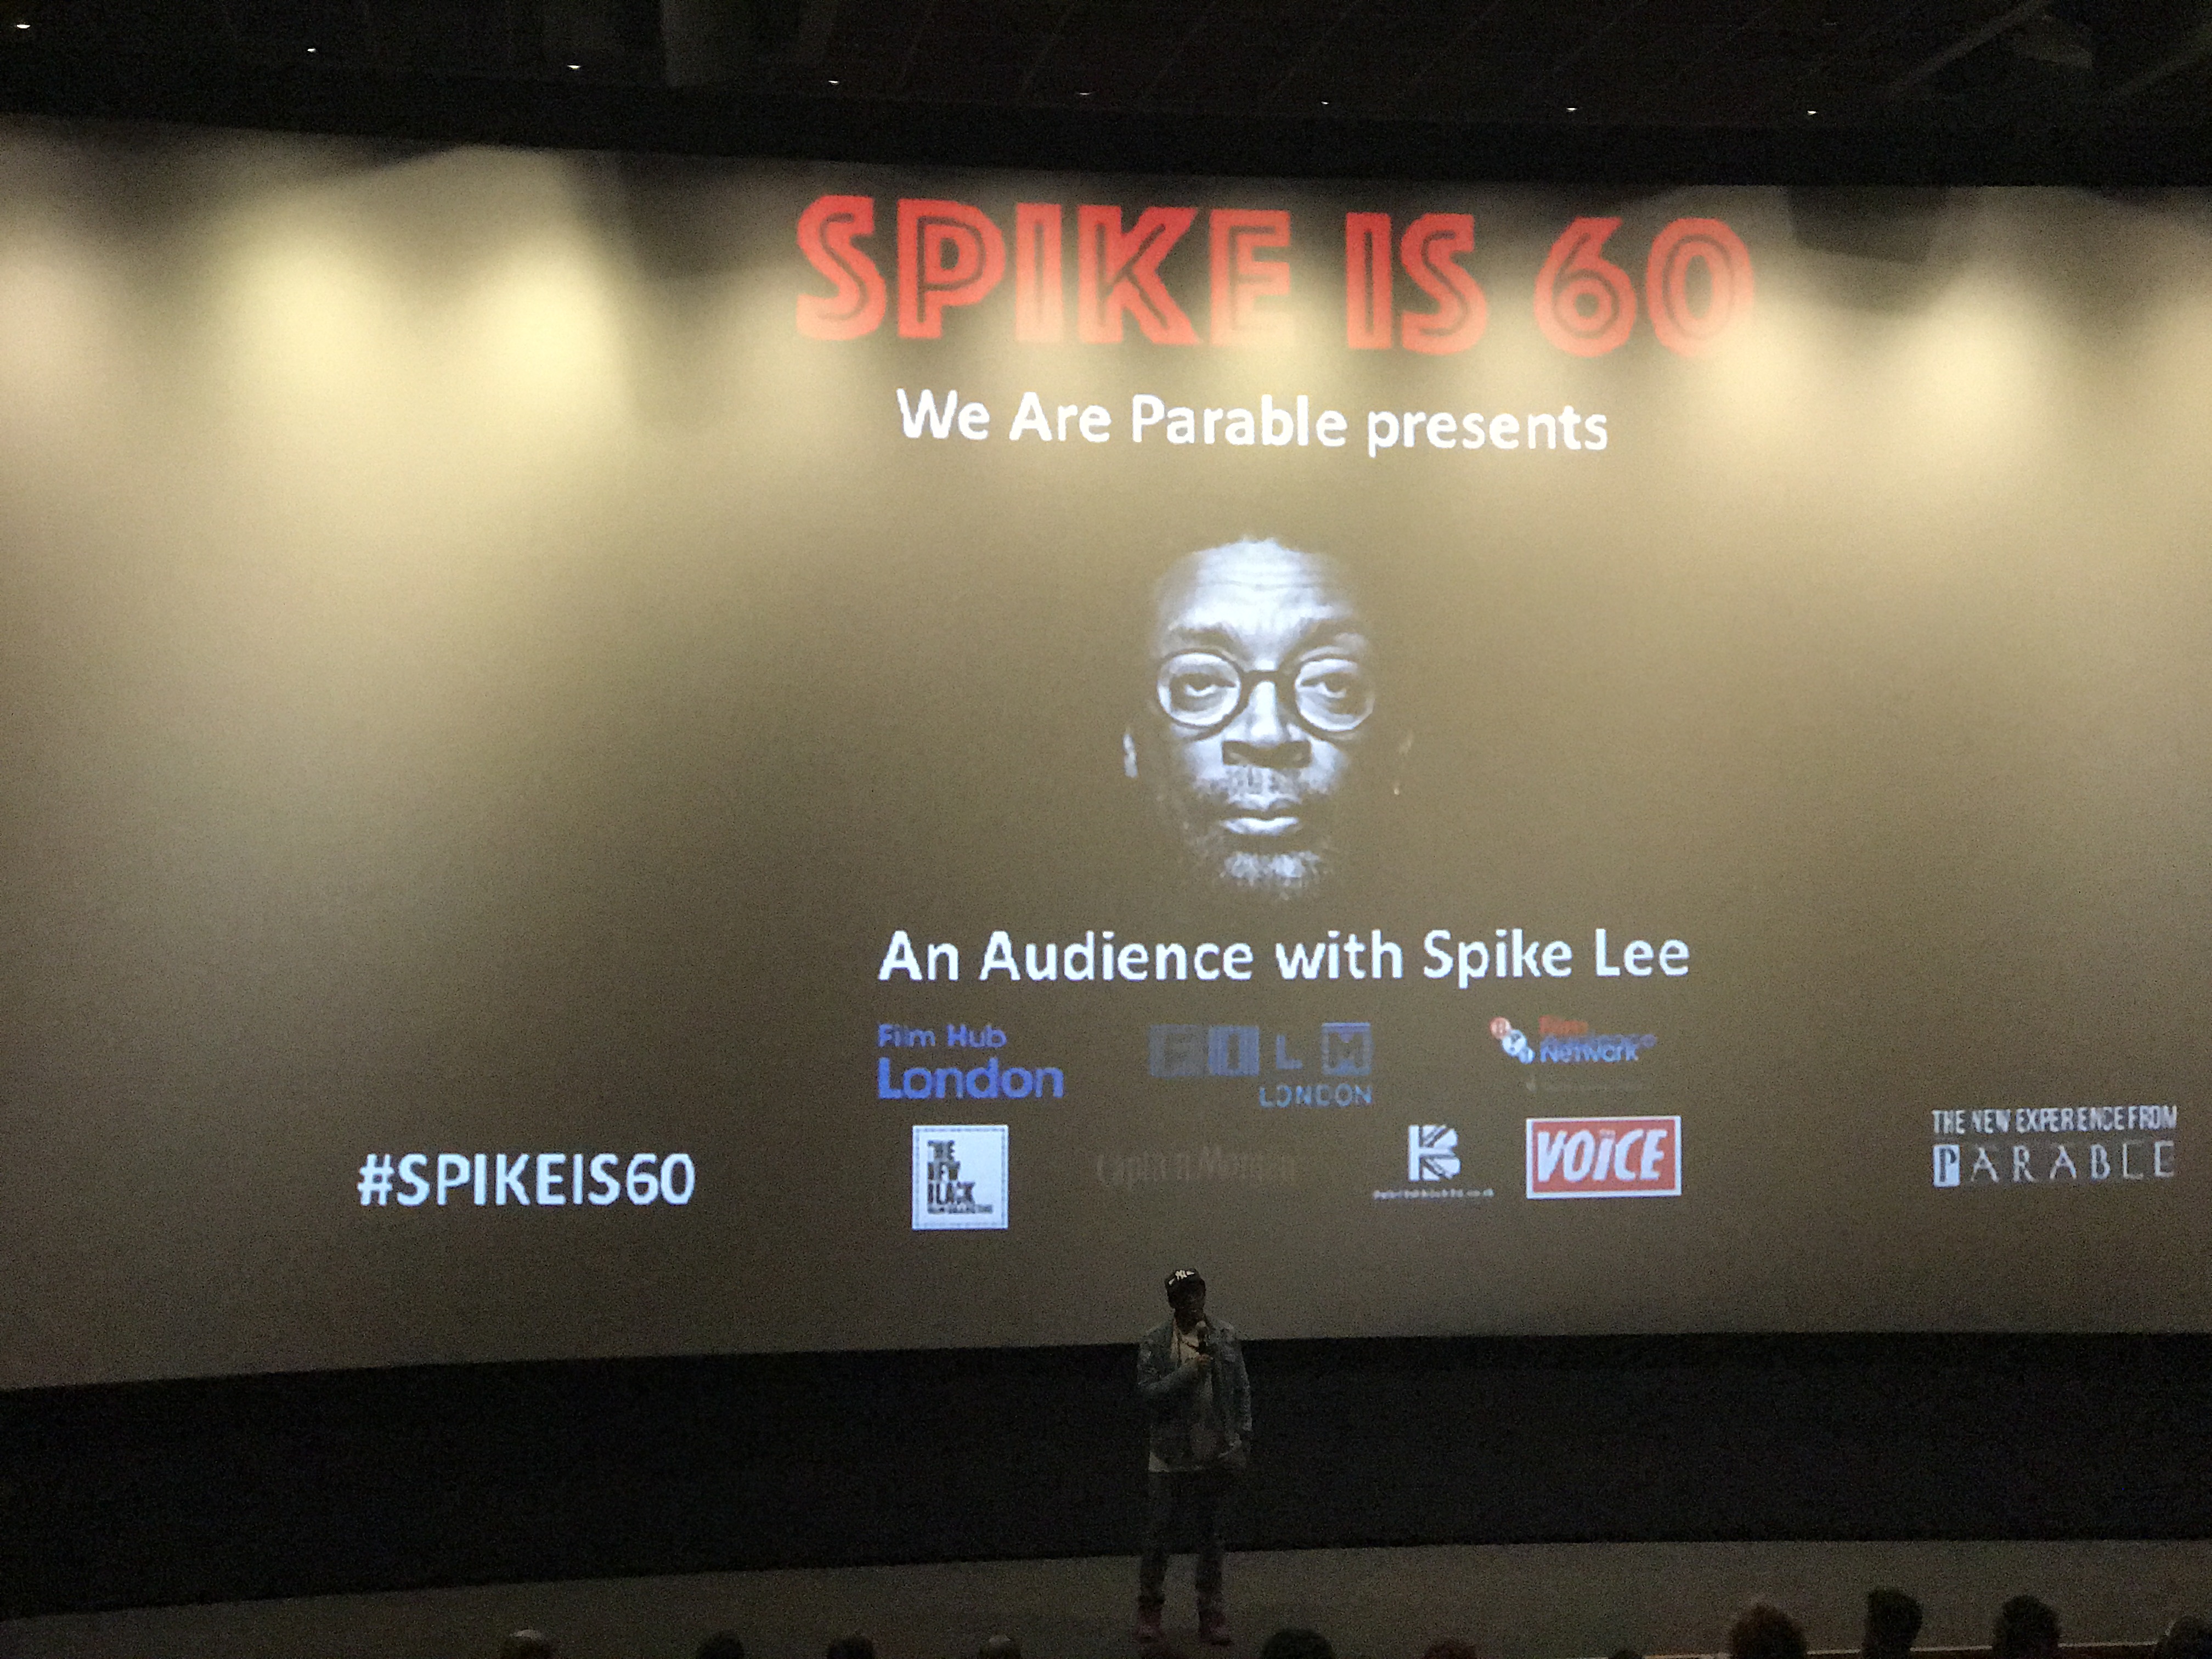 An Audience With Spike Lee